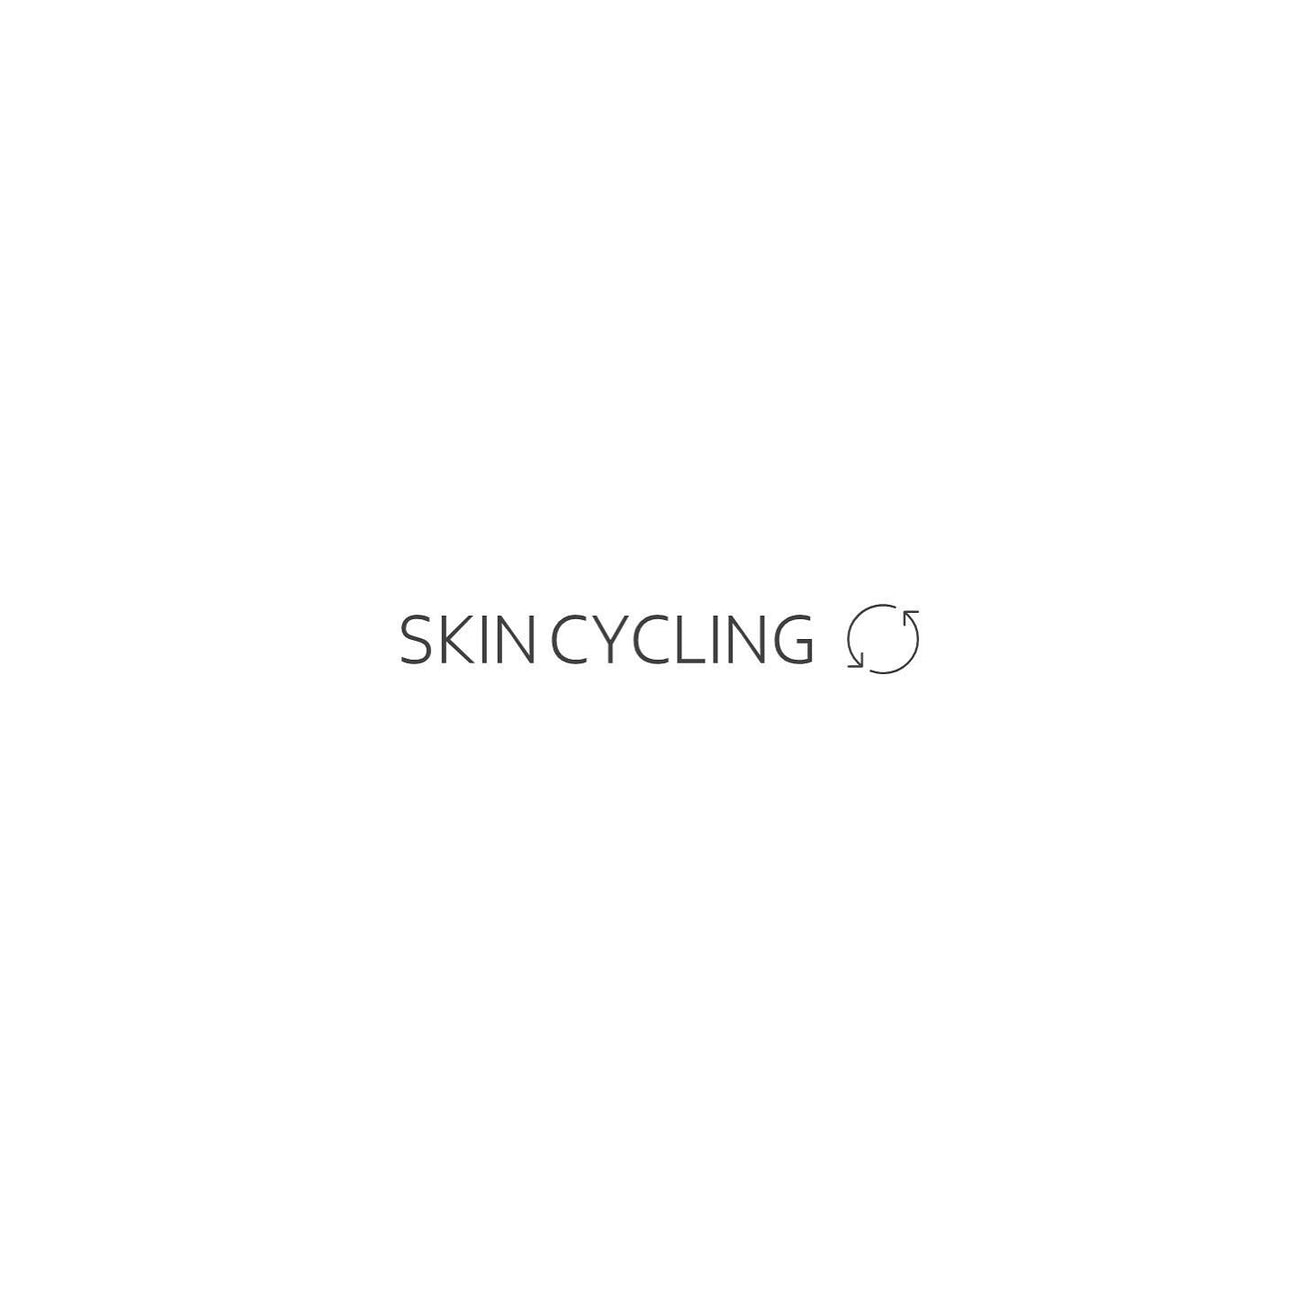 Skincycling